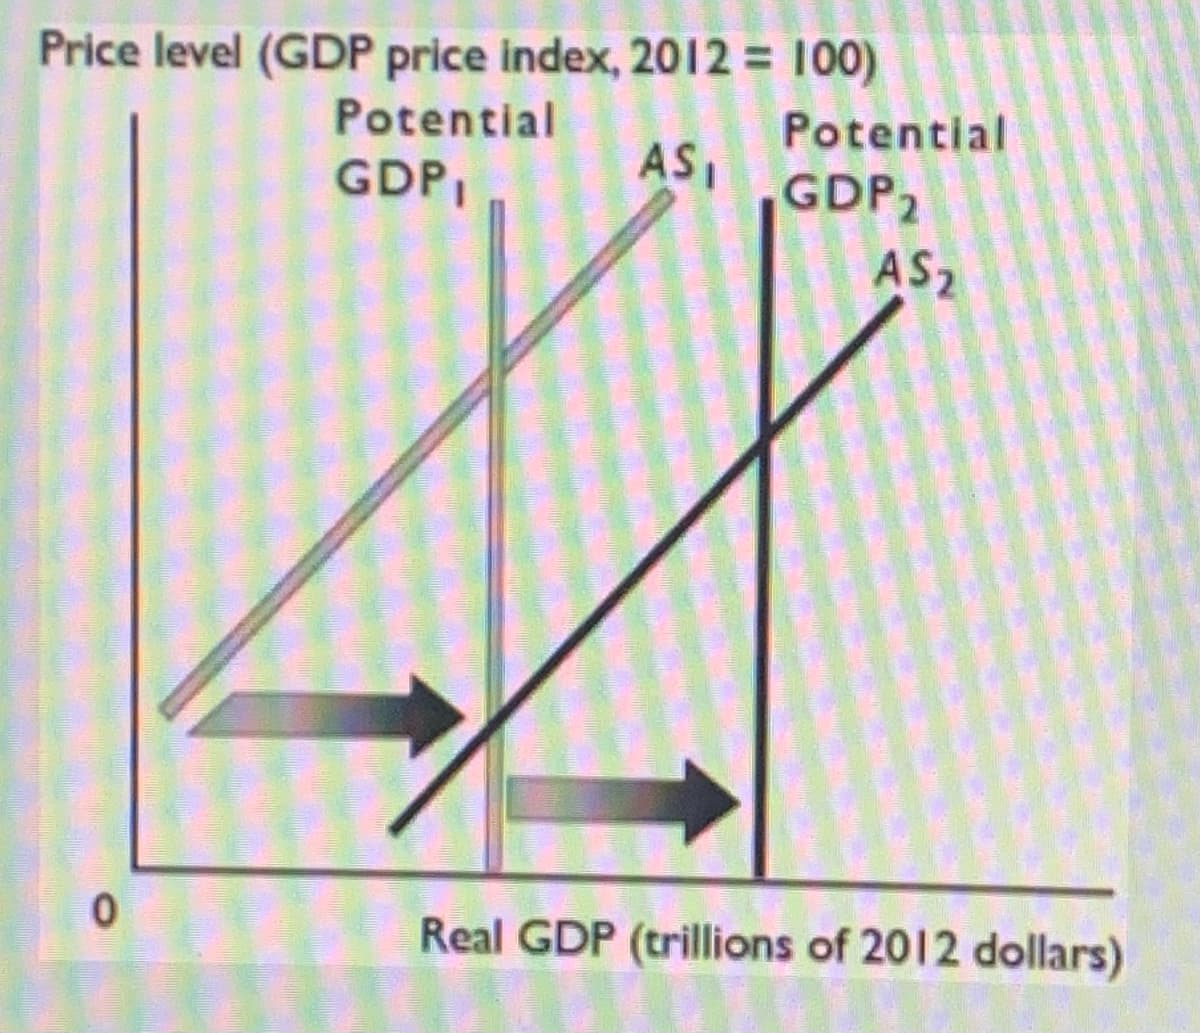 Price level (GDP price index, 2012 = 100)
Potential
Potential
GDP,
AS,
GDP2
AS2
Real GDP (trillions of 2012 dollars)
